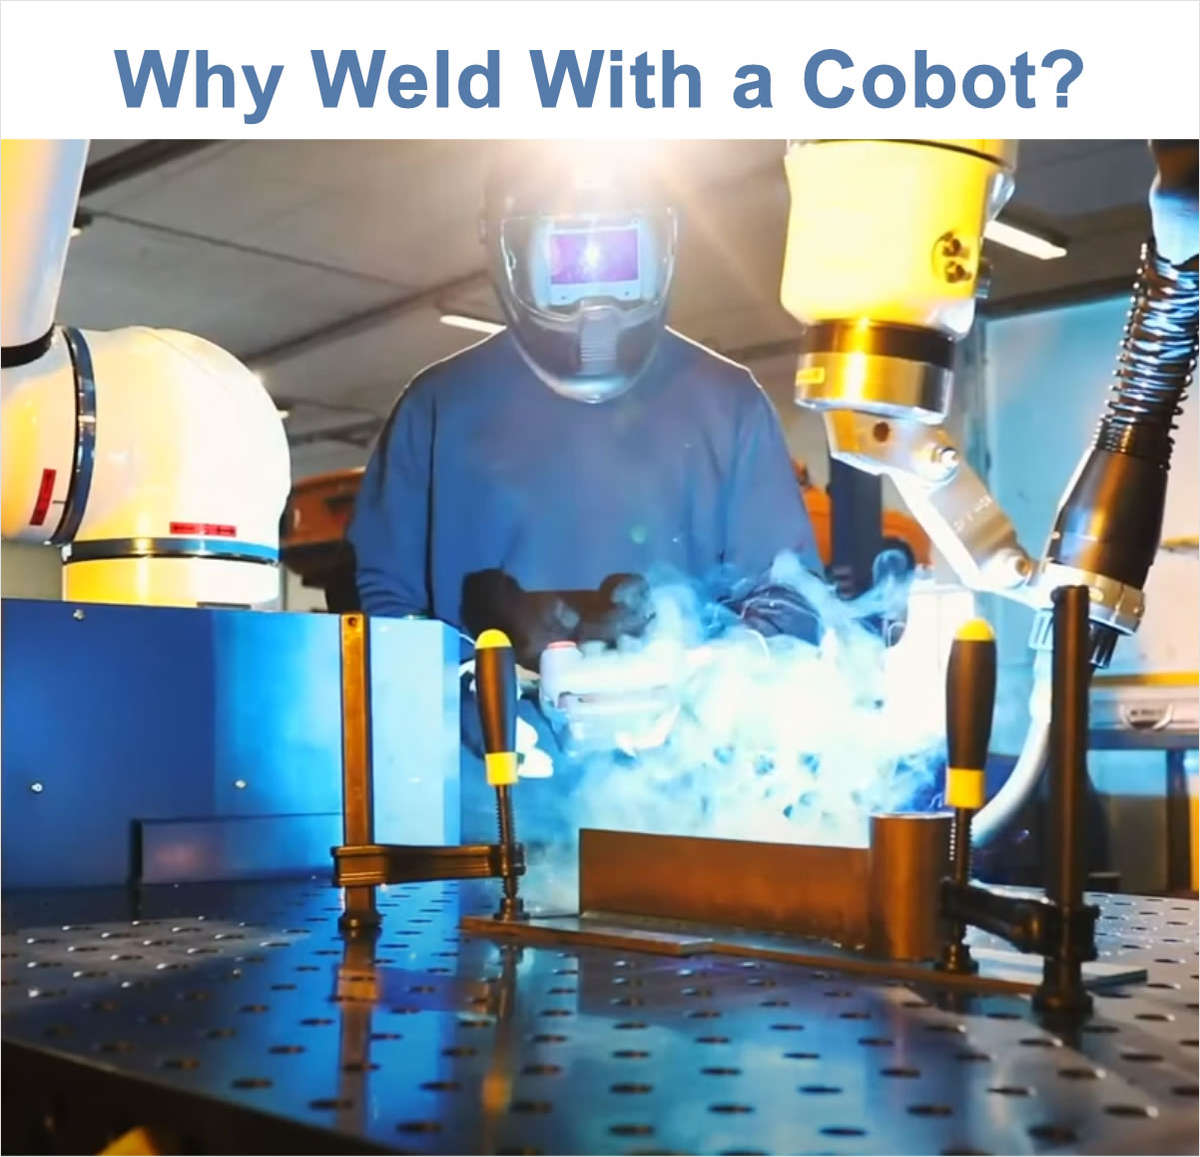 Why Weld With a Cobot?